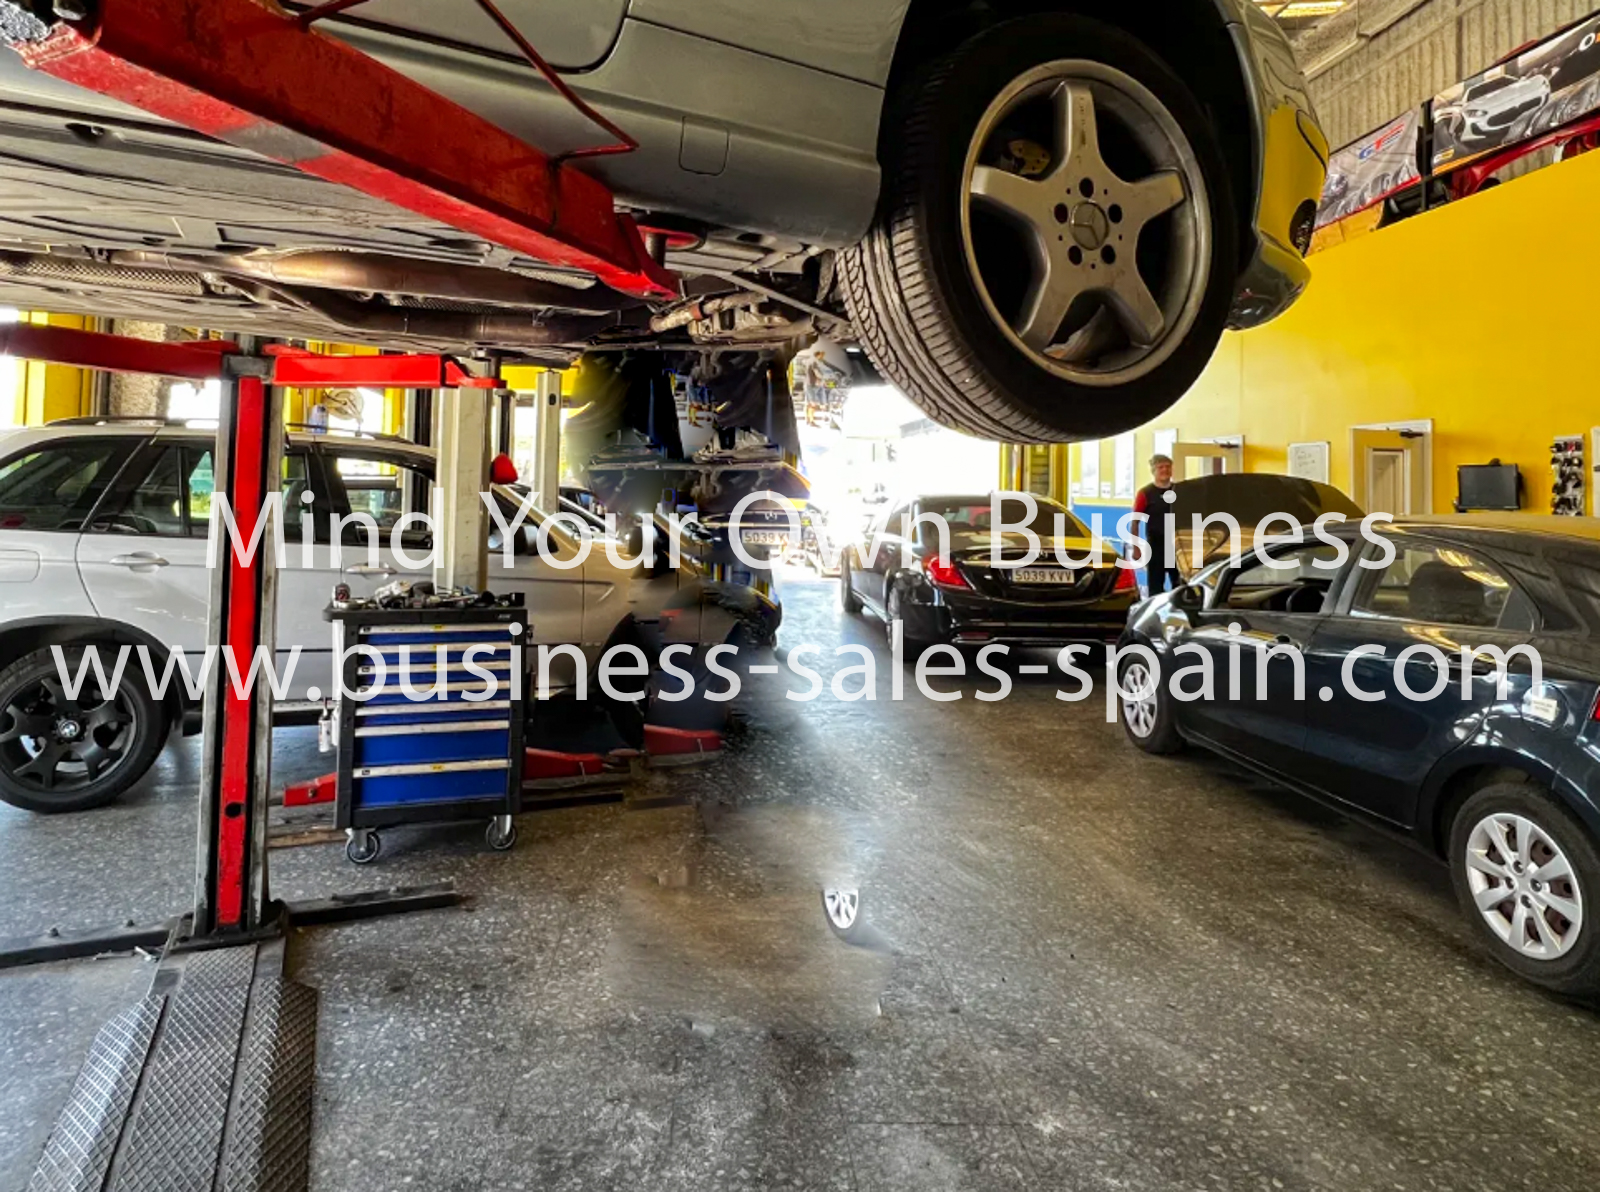 One of The best known Garage and Tyre Centres On The Costa Del Sol